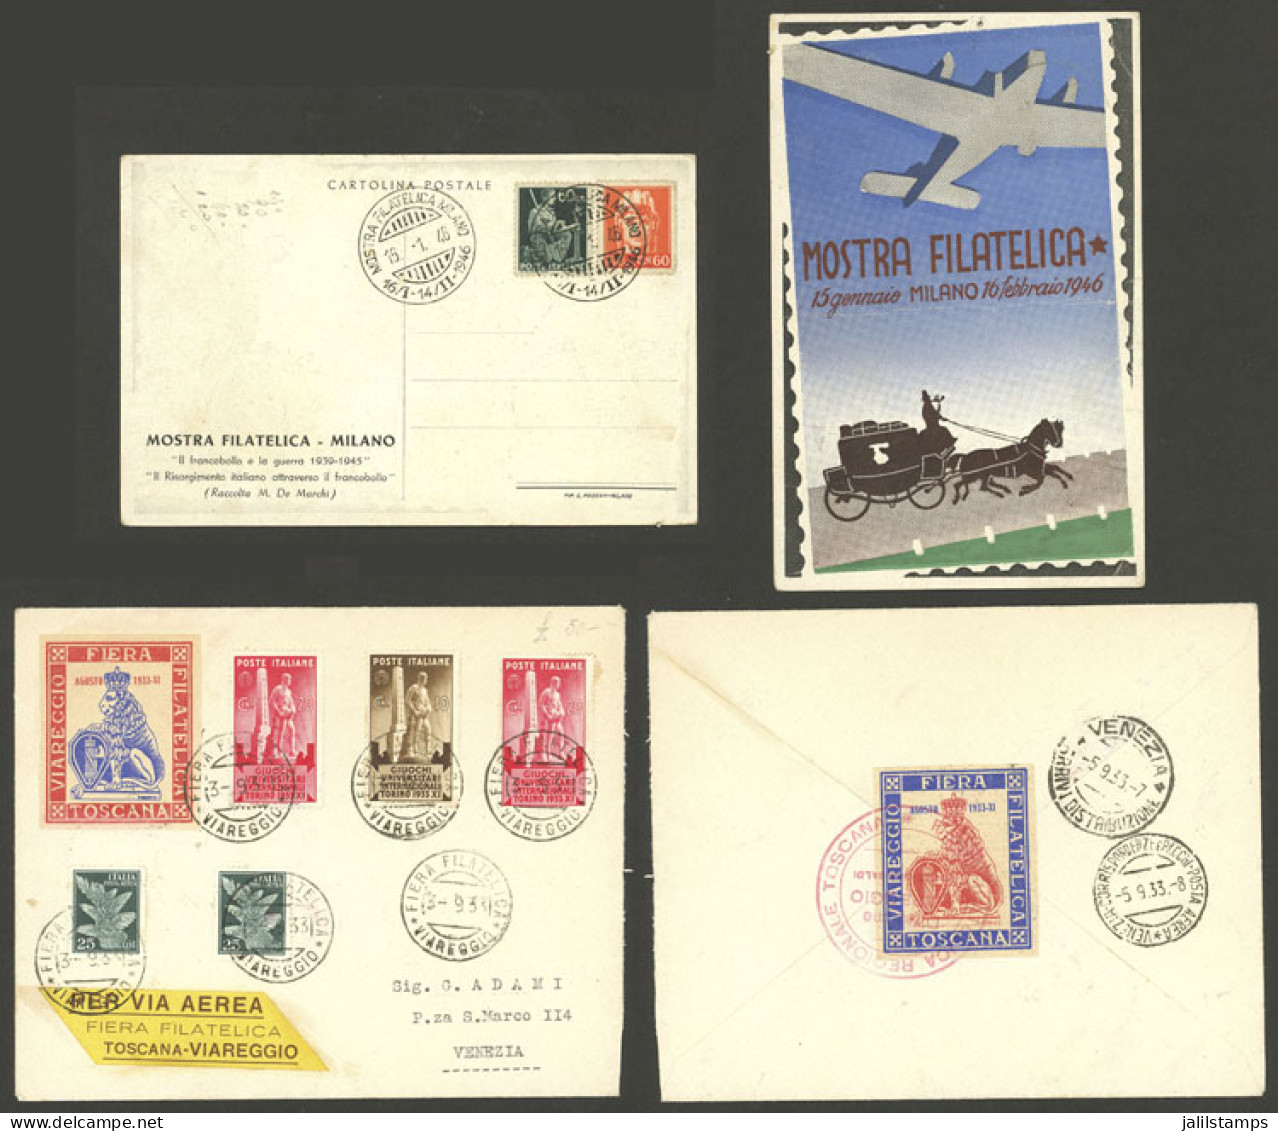 ITALY: Cover + Postcard Of The Year 1933 And 1946 Commemorating Philatelic Exhibitions, VF Quality! - Ohne Zuordnung